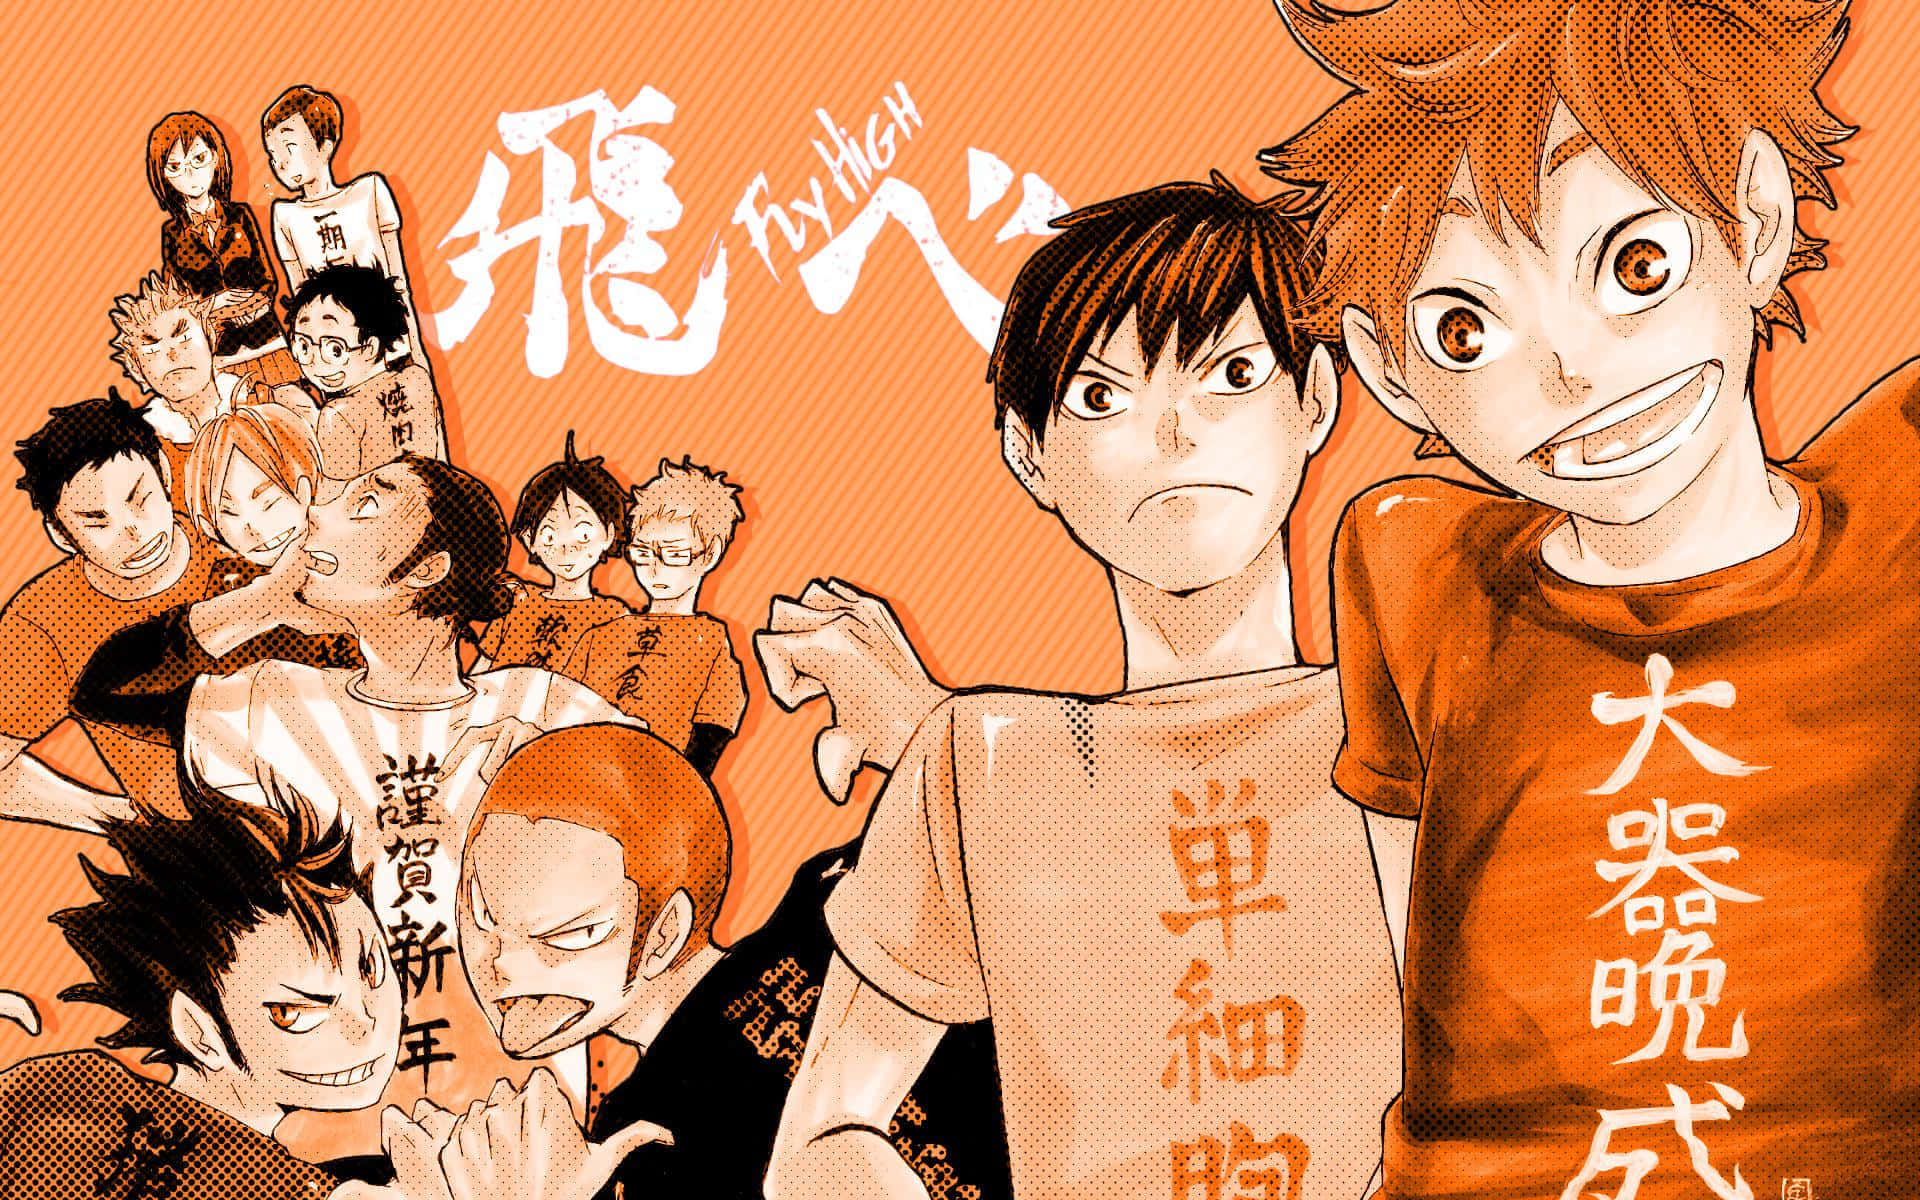 "Captivating Illustration of Haikyuu Players in Action" Wallpaper